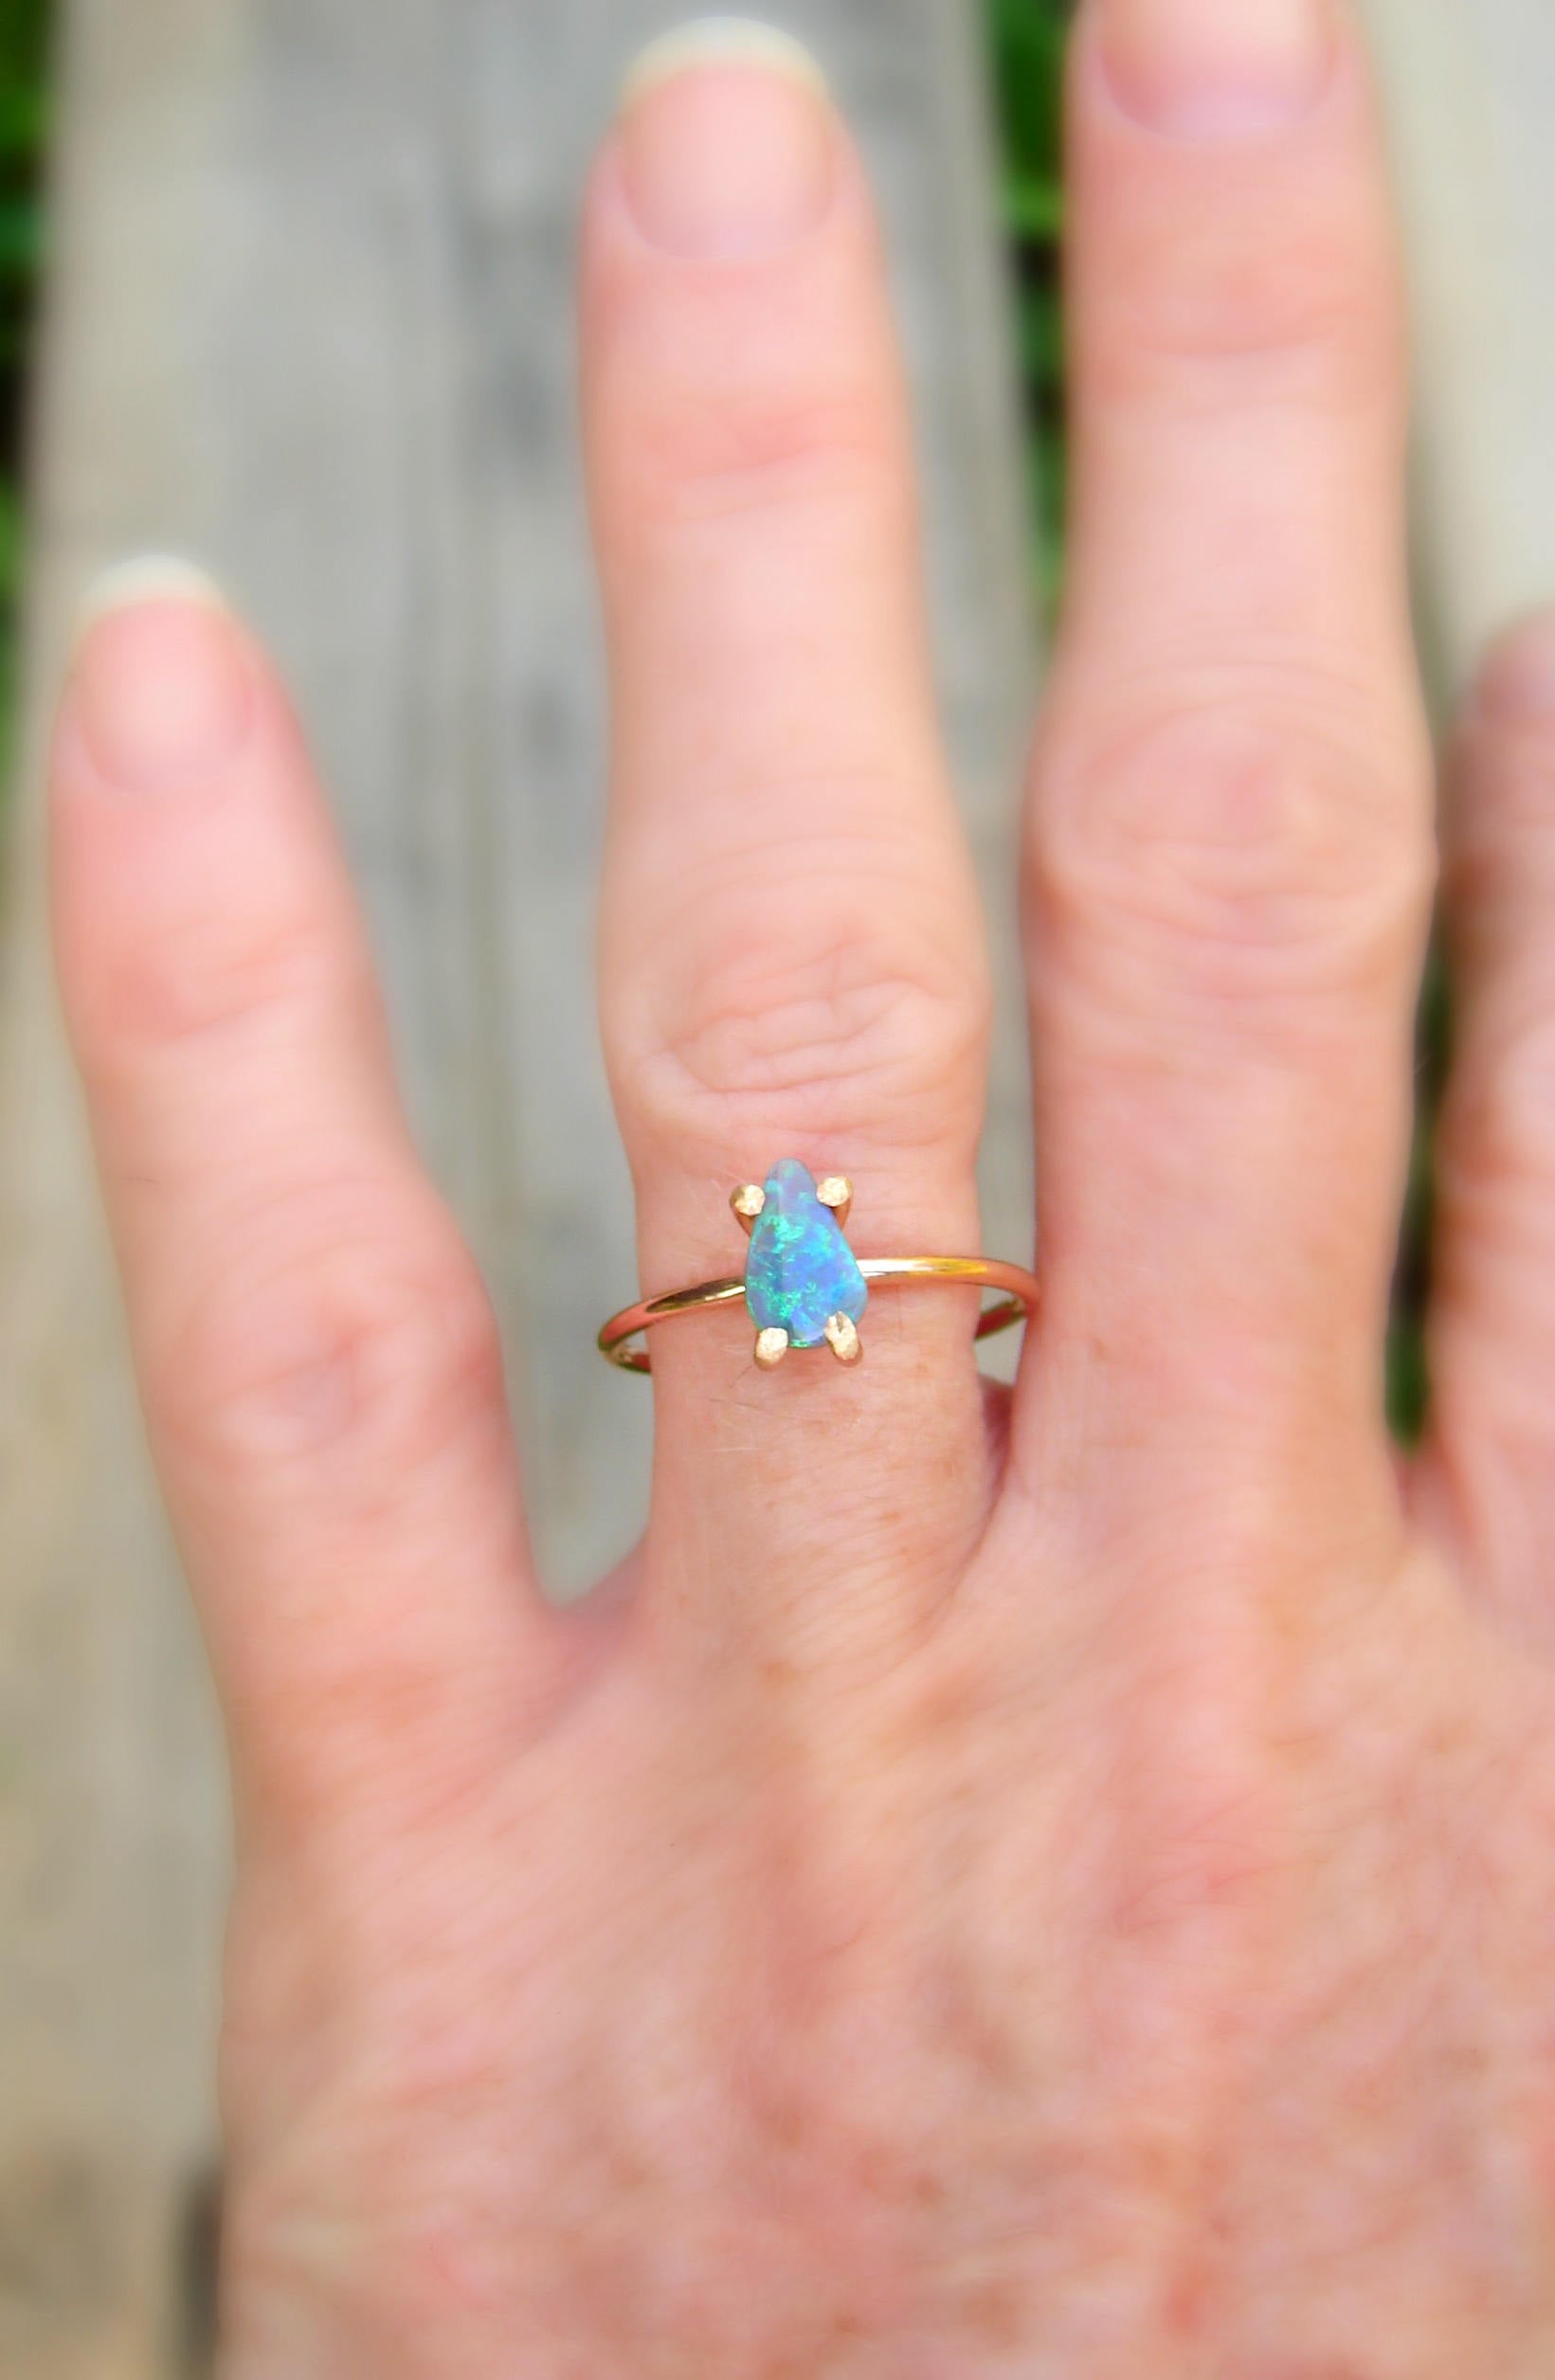 Large Blue Opal Ring, Blue Zodiac Jewelry, Rough Opal is an October Birthstone, Fire Opal Gemstone, Promise Ring in Gold and Opal, Size 7.5